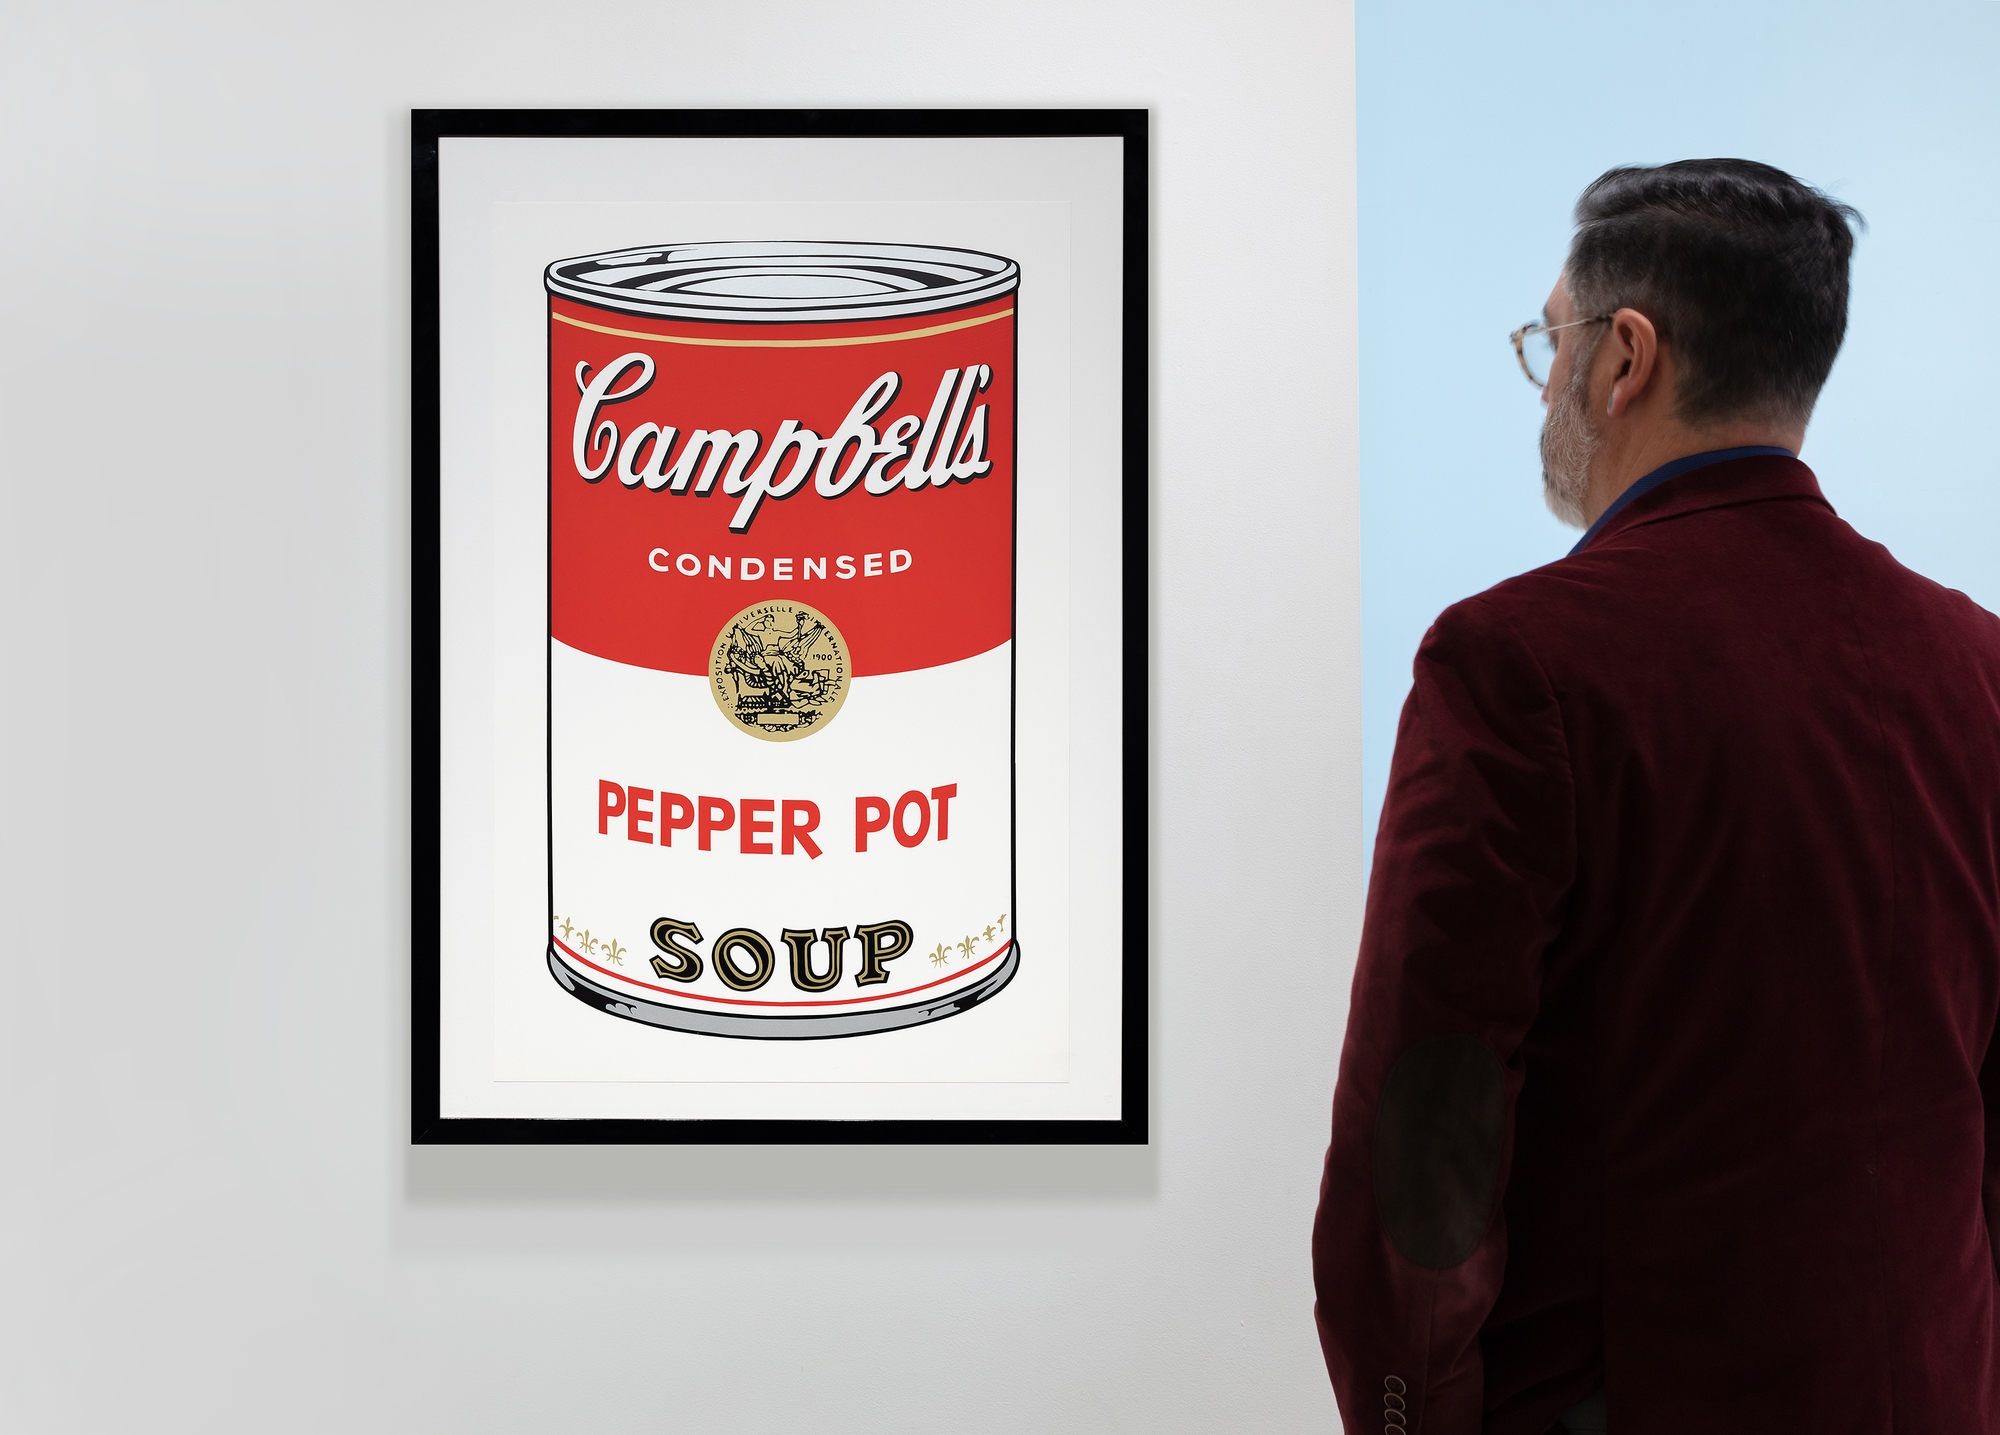 Andy Warhol's Campbell's Soup Cans series marks a pivotal moment in his career and the Pop Art movement. The series, consisting of 32 canvases, each depicting a different flavor, revolutionized the art world by elevating mundane, everyday consumer goods to the status of high art. The screen print Pepper Pot from 1968 employs his signature style of vivid, flat colors and repeated imagery, characteristic of mass production and consumer culture. Screen printing, a commercial technique, aligns with Warhol's interest in blurring the lines between high art and commercial art, challenging artistic values and perceptions.